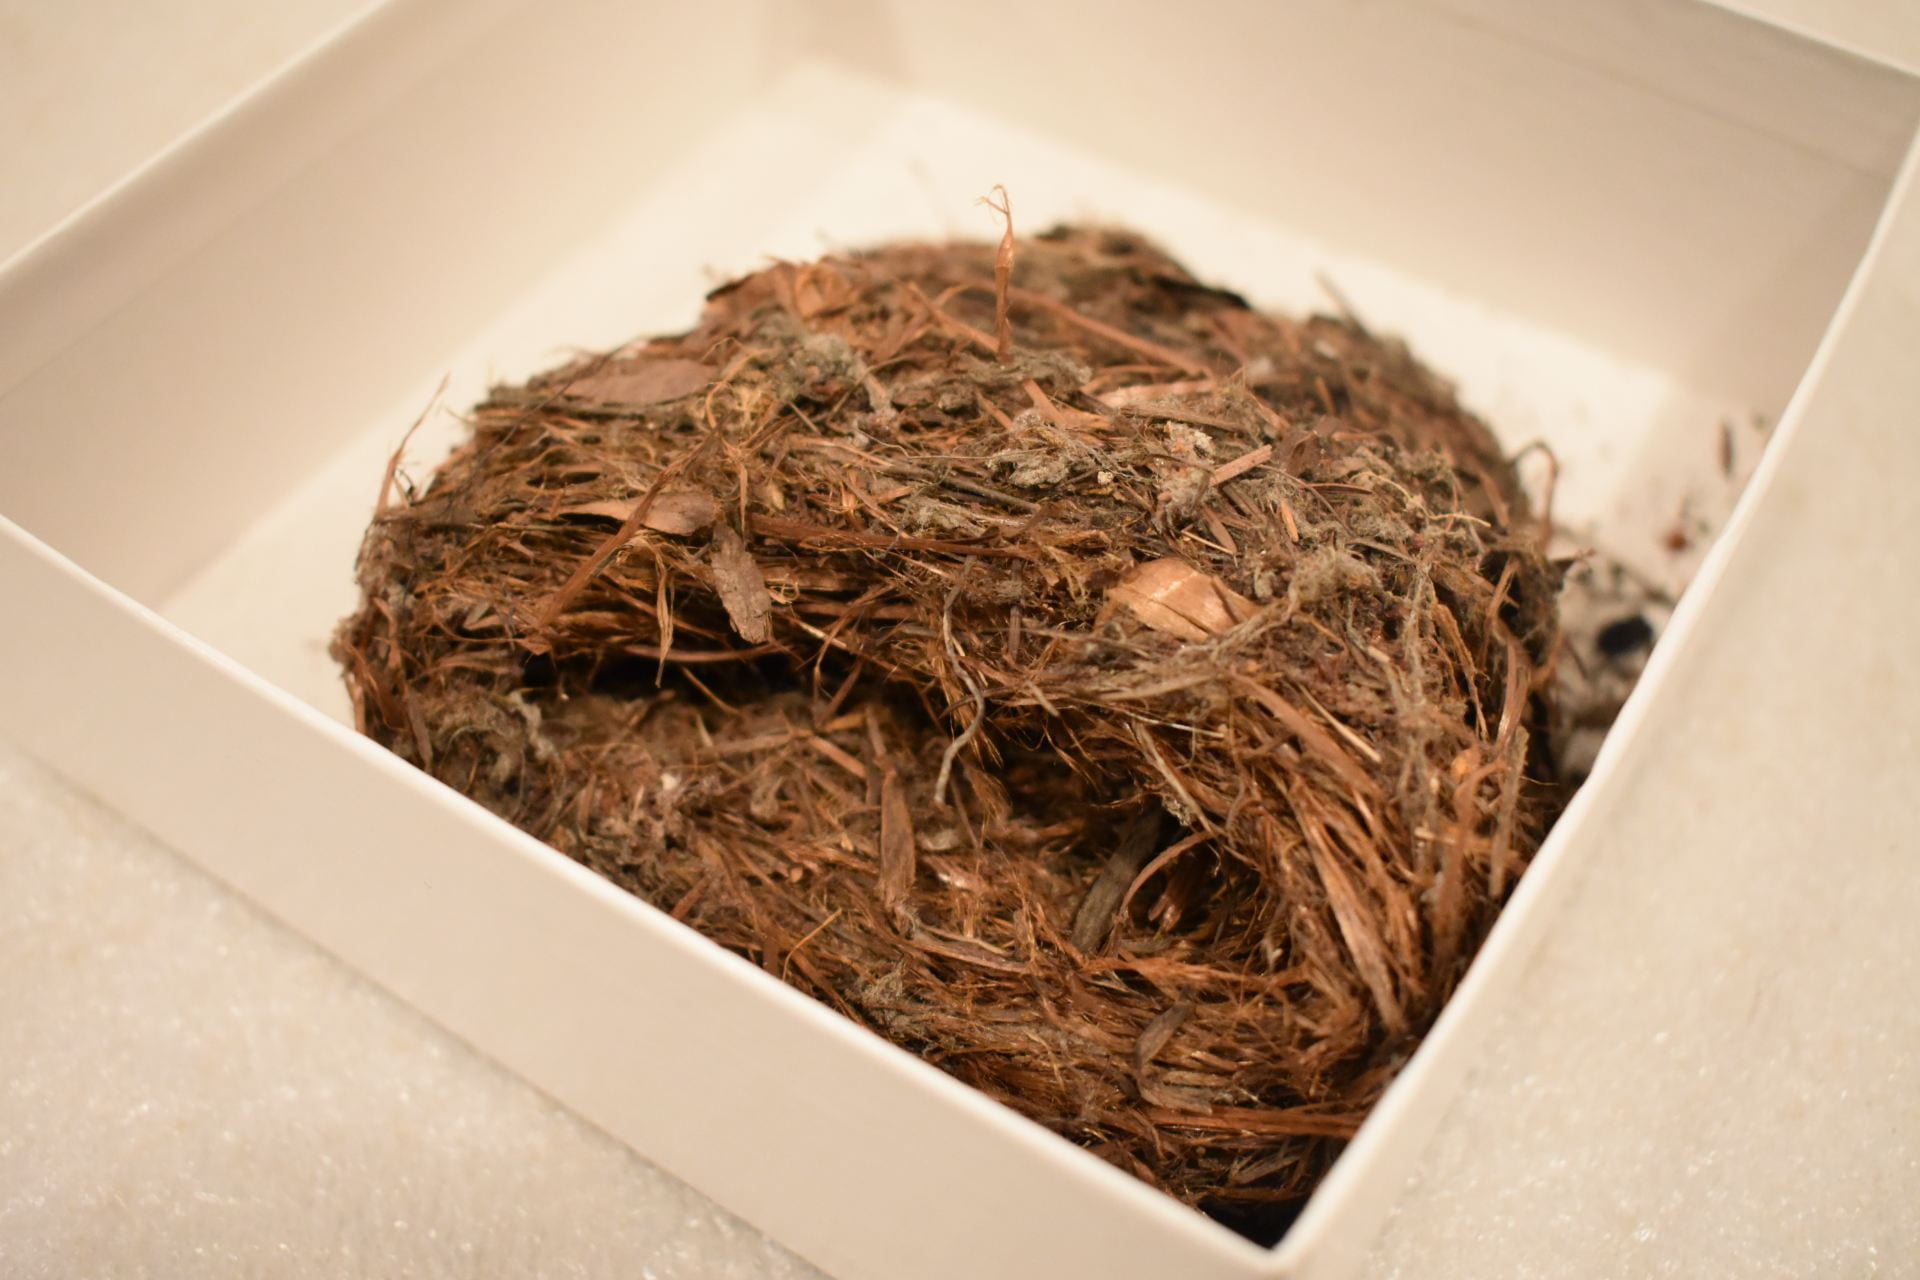 A bird nest of twigs, leaves, and grass laying on its side in a white box.